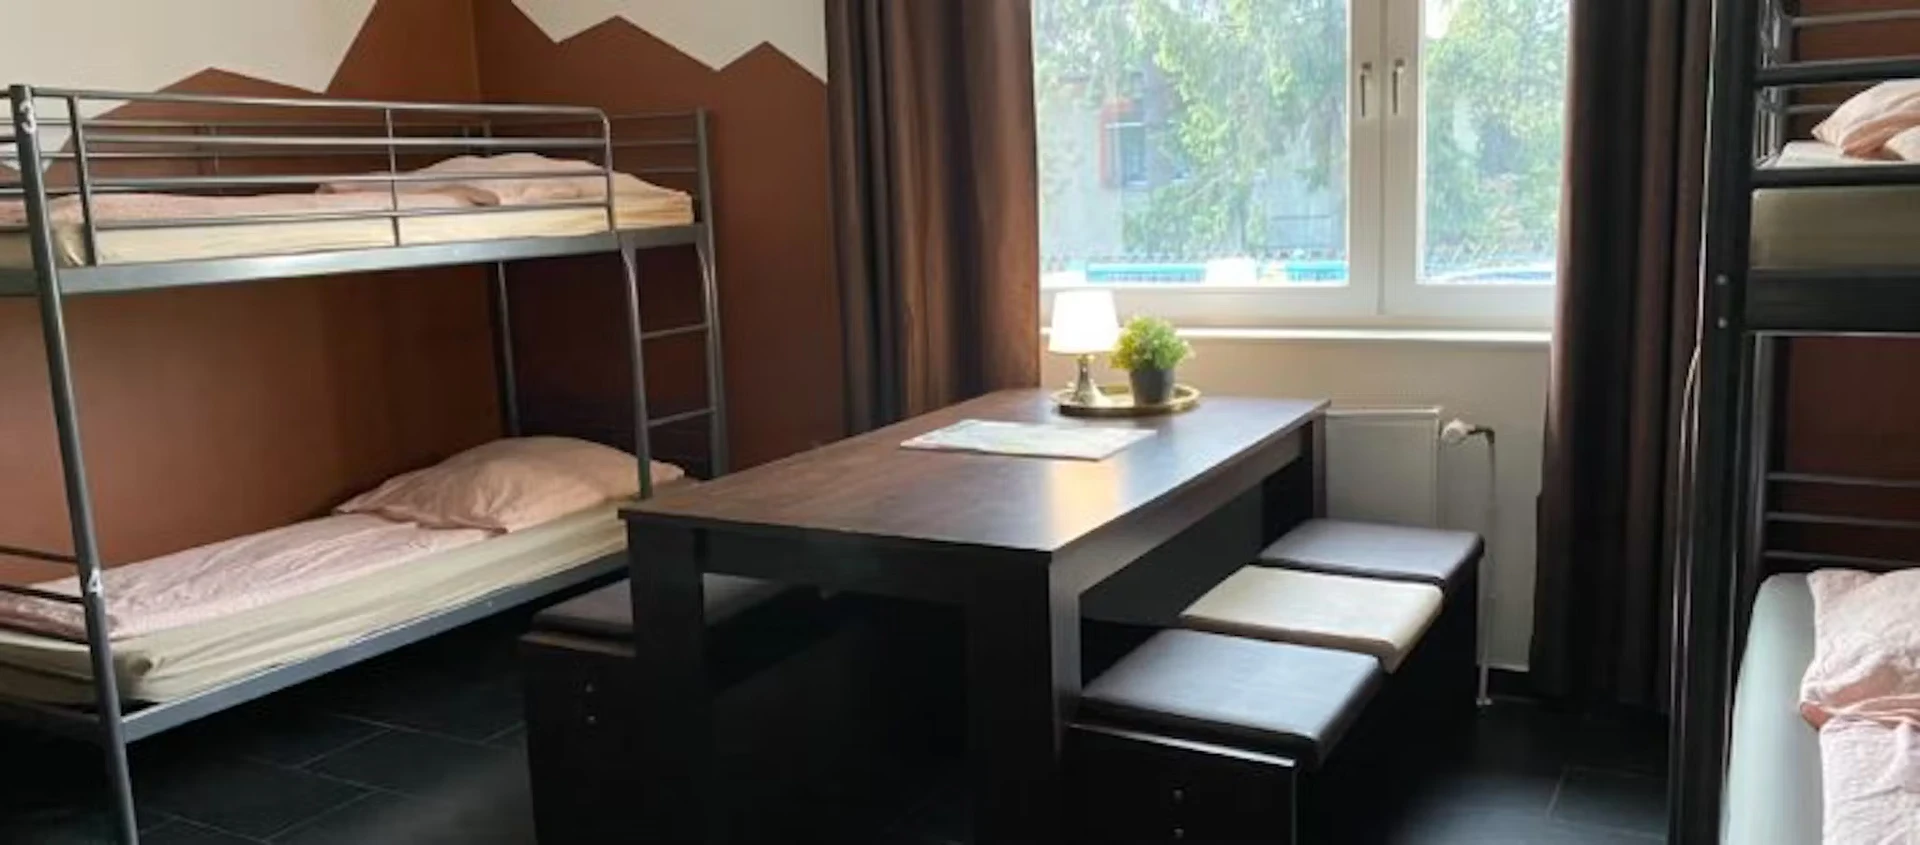 Shared room with desk in Berlin